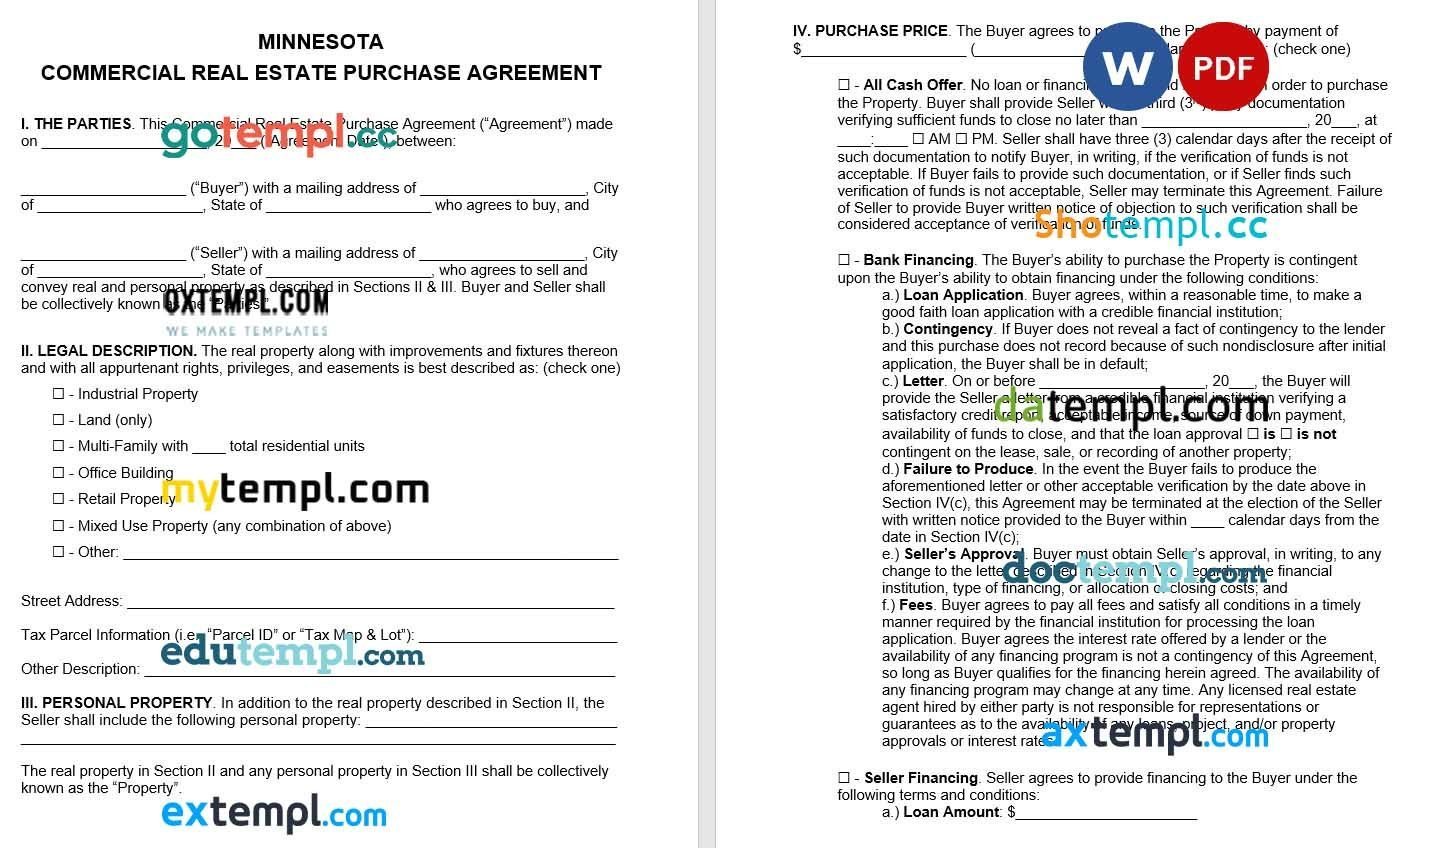 Minnesota Commercial Real Estate Purchase Agreement Word example